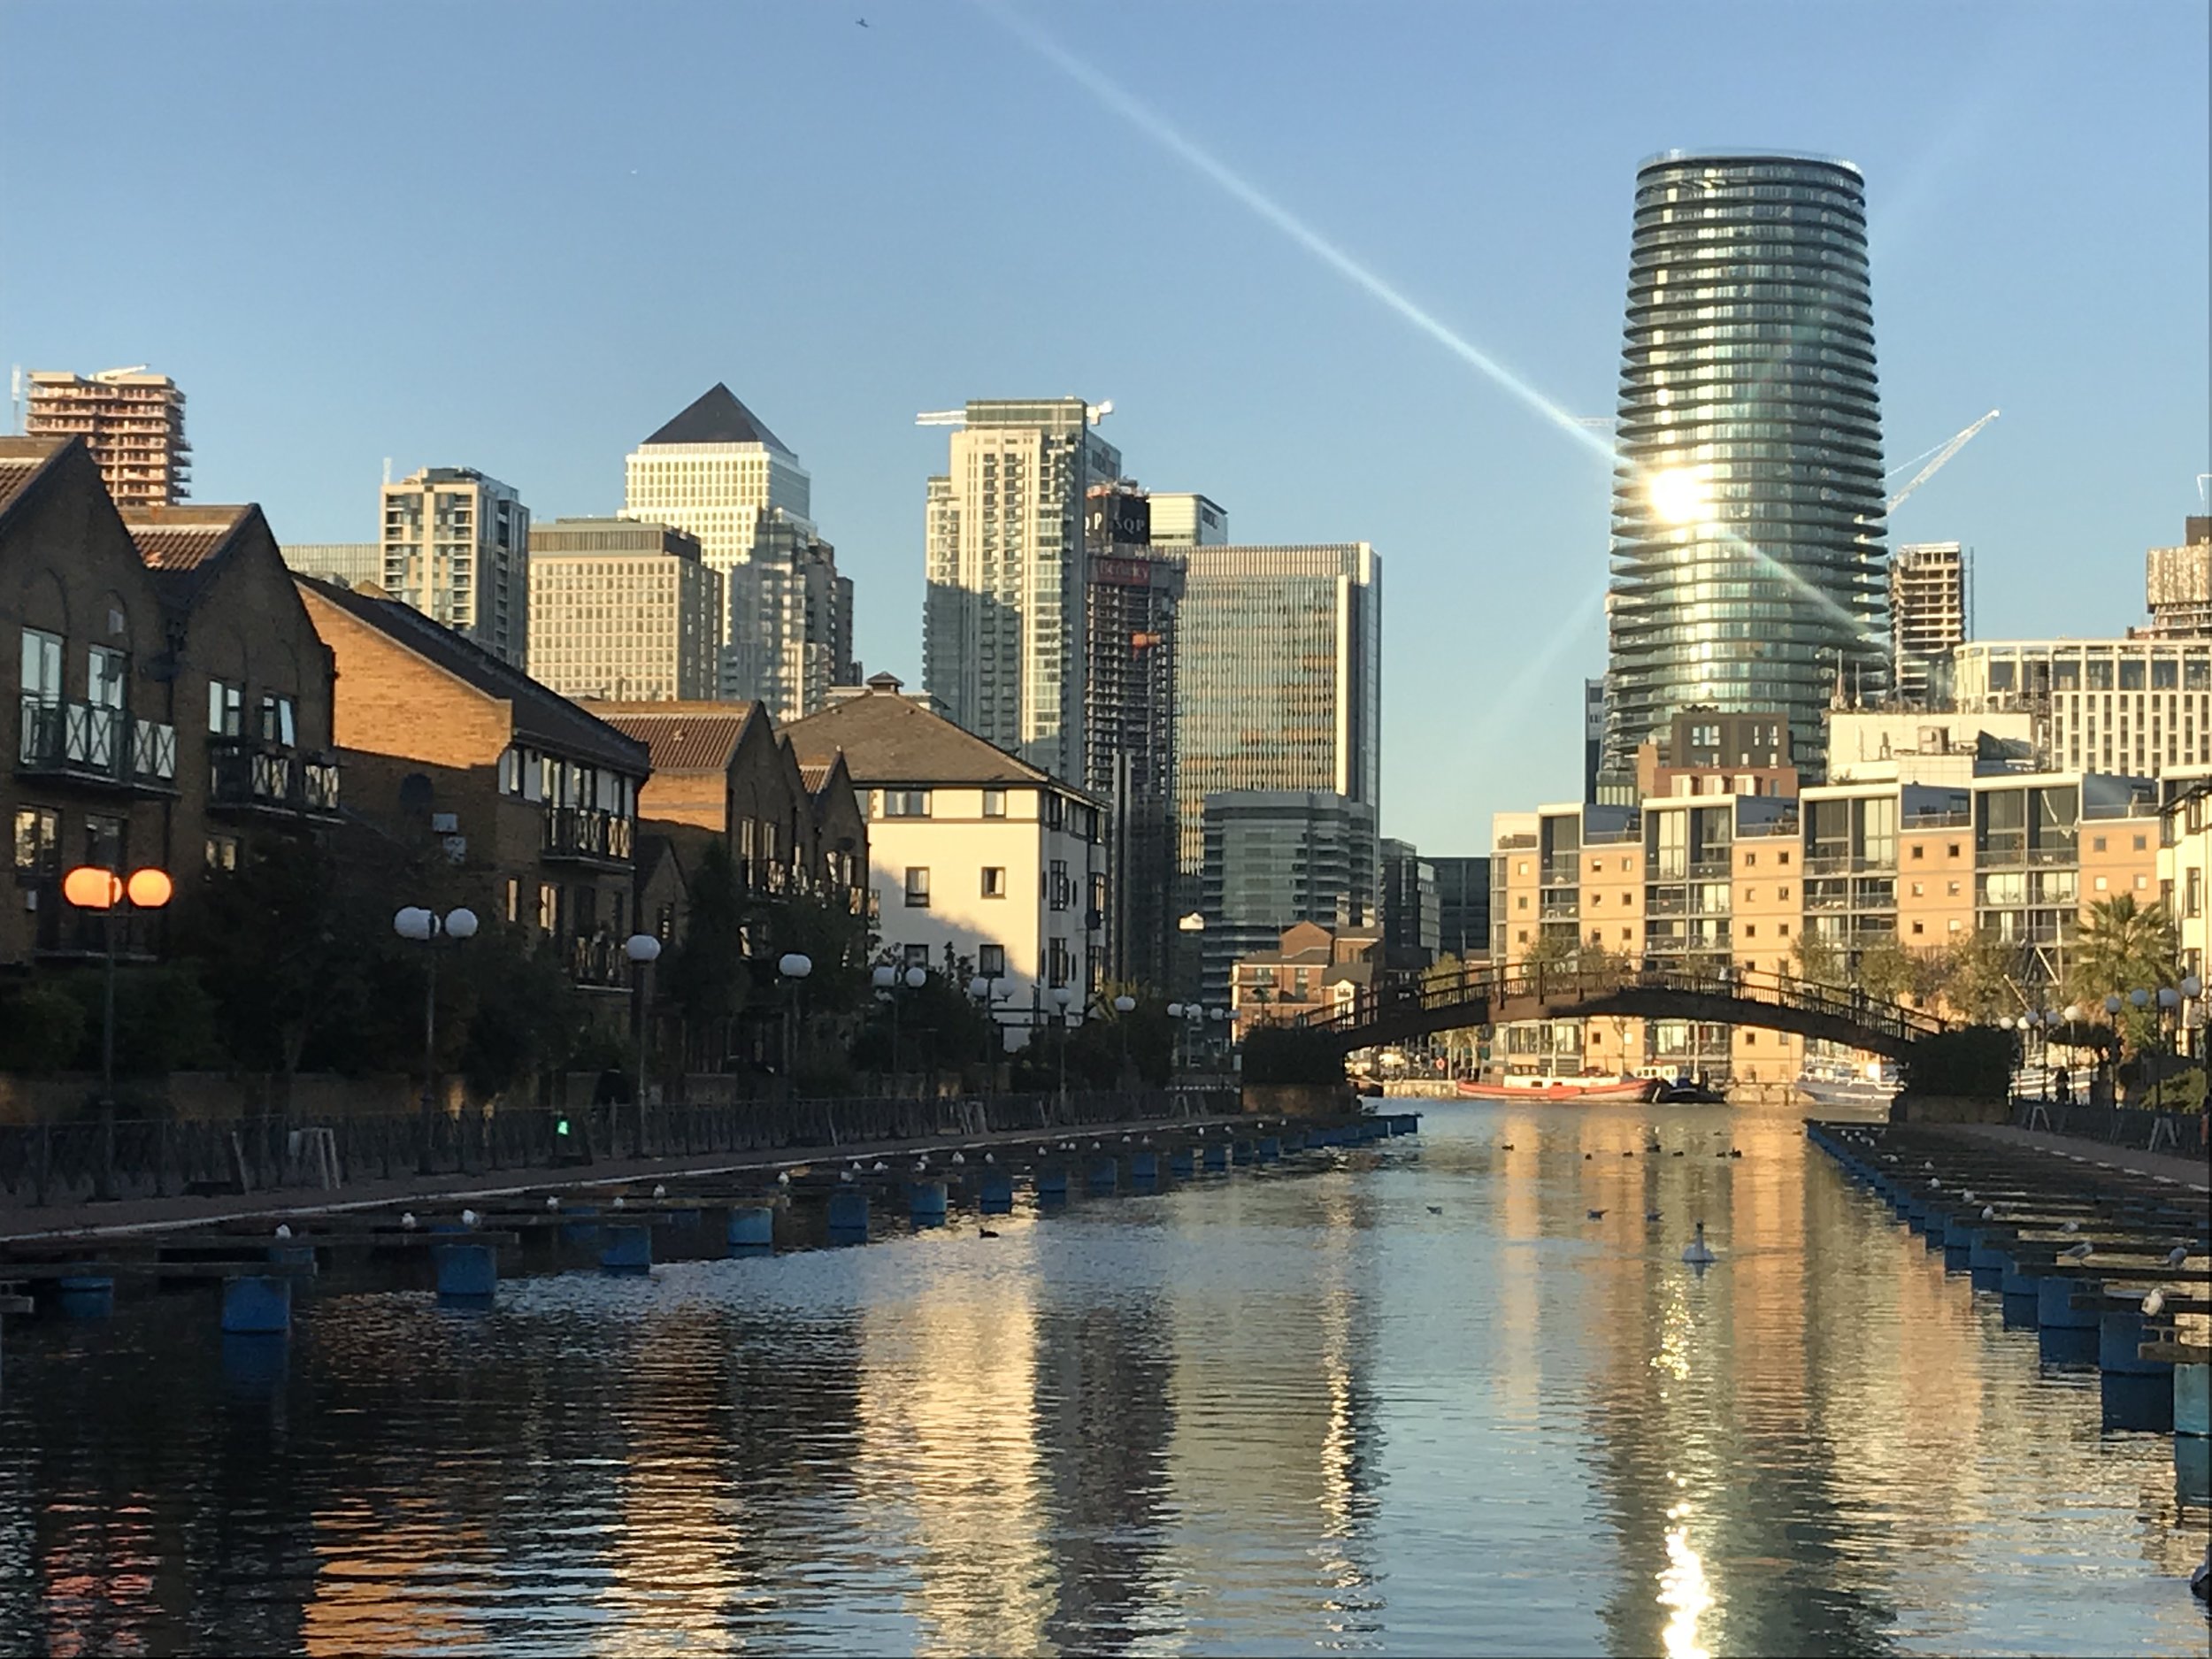 Canary Wharf from Clippers Quay